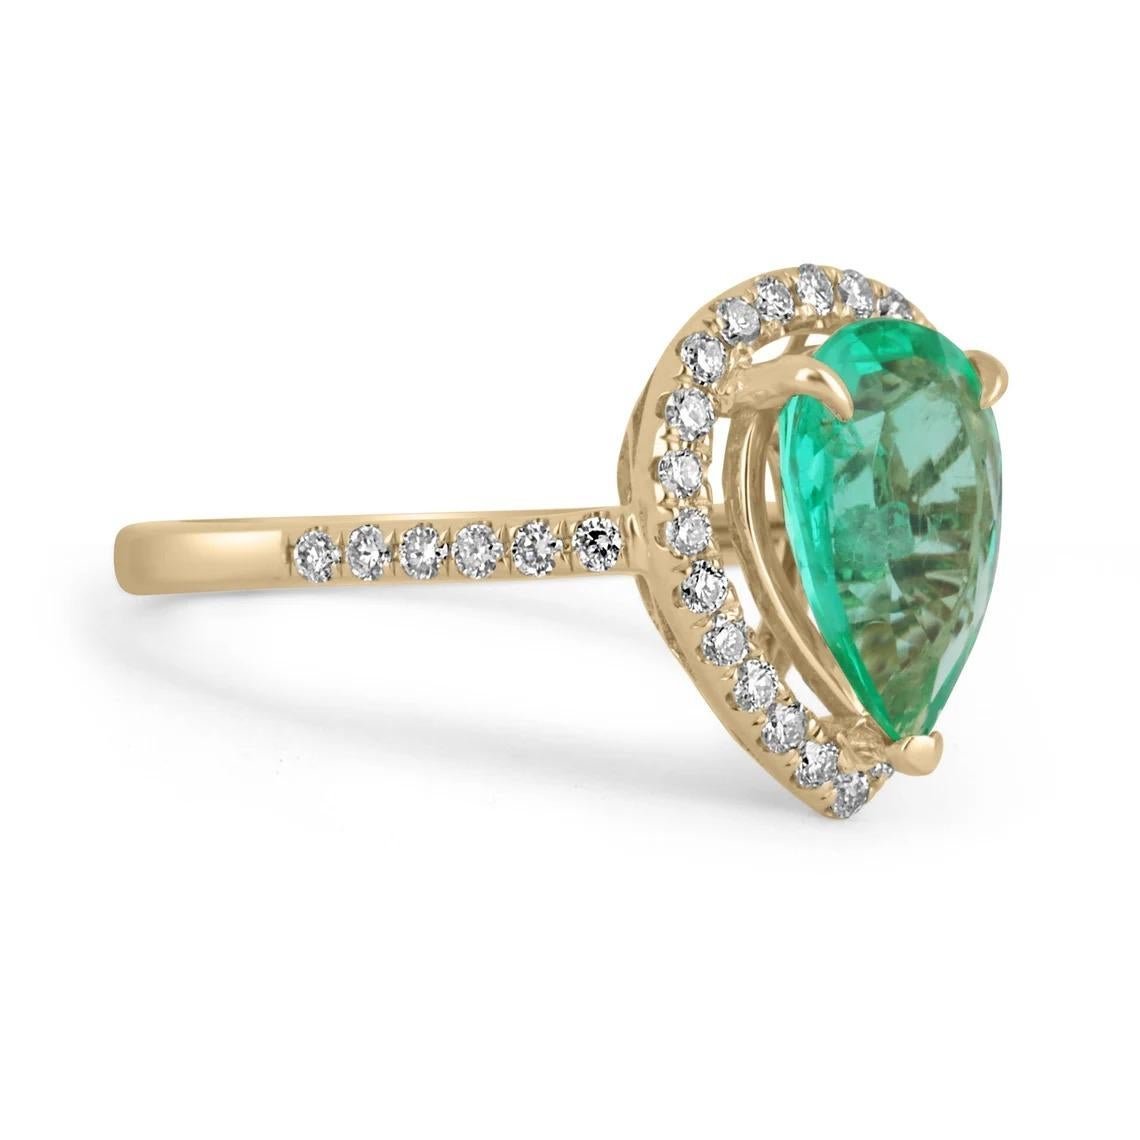 An absolutely stunning, emerald and diamond engagement ring. The center stone features a high-quality 1.75-carat, natural Colombian emerald. Cut in the shape of a pear, with a ravishing electric green color, excellent clarity, and the best of all...